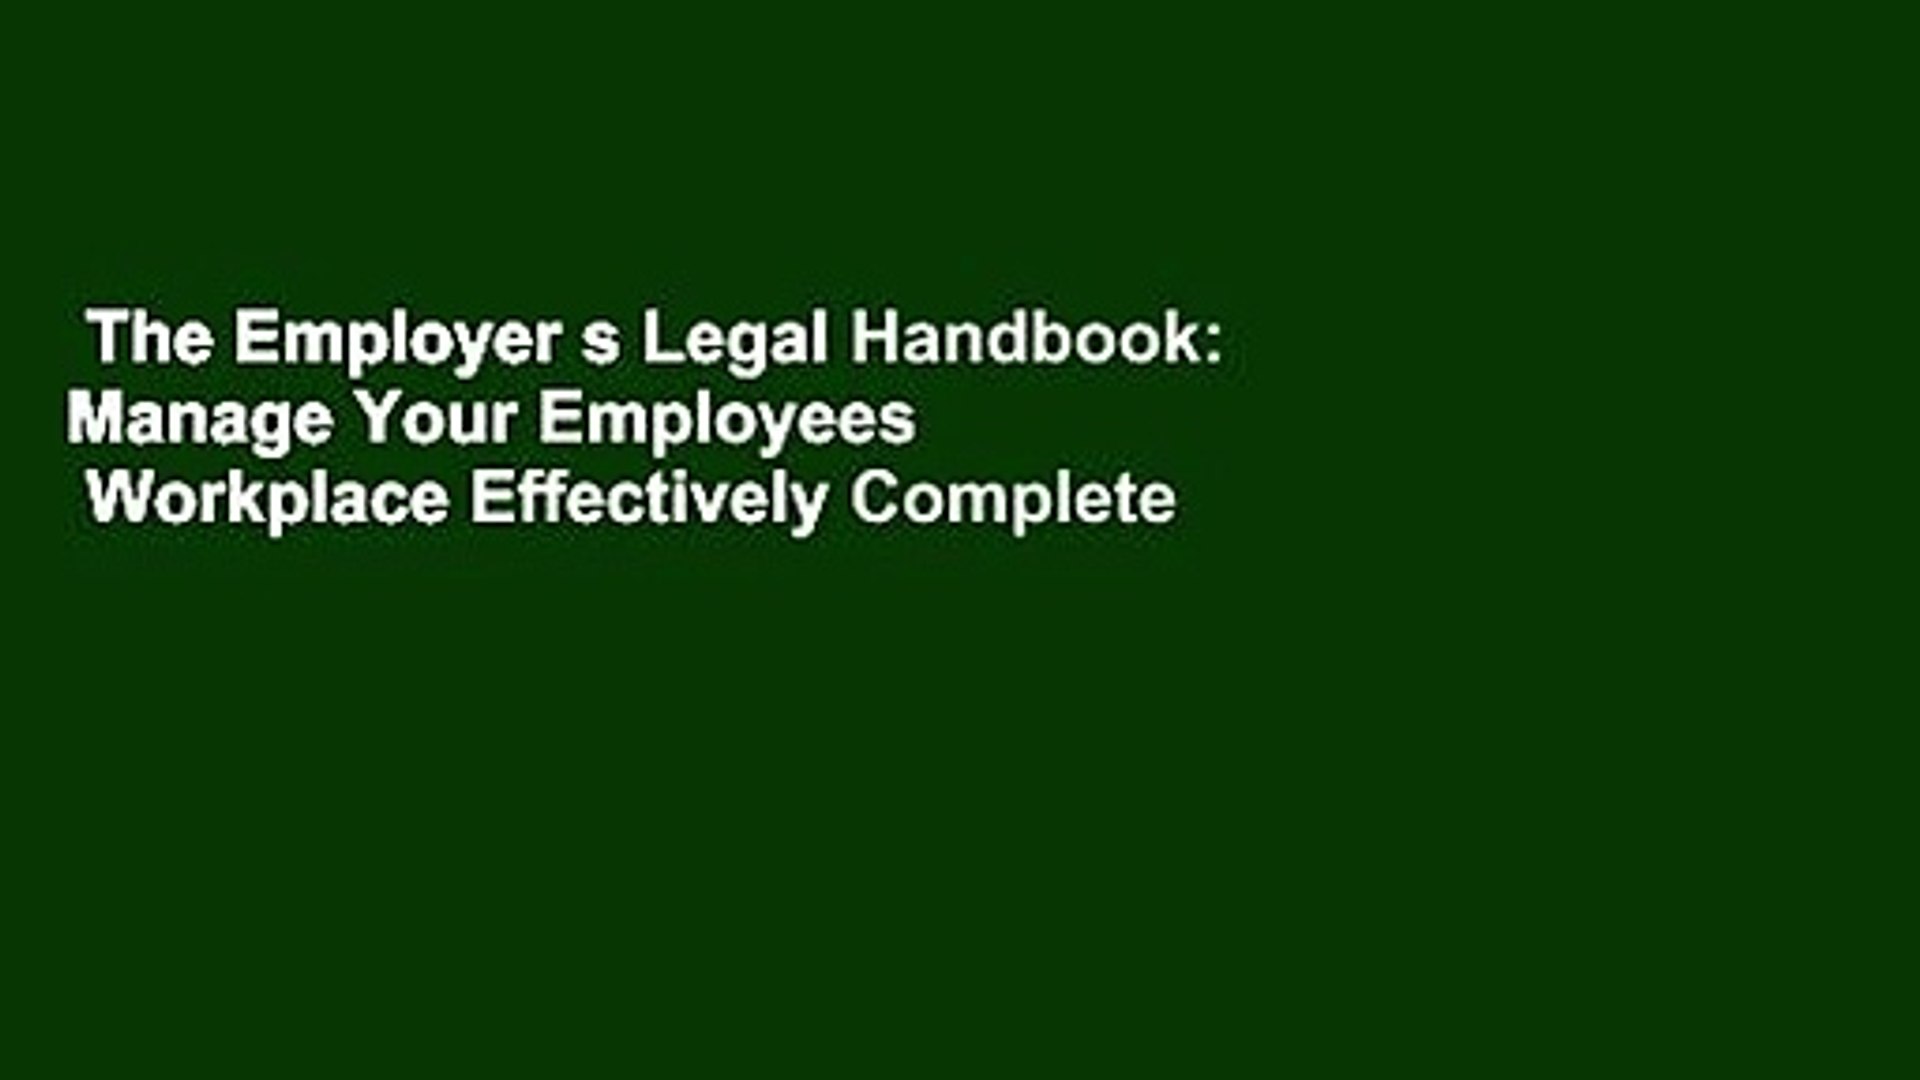 The Manage Your Employees & Workplace Effectively Employers Legal Handbook 